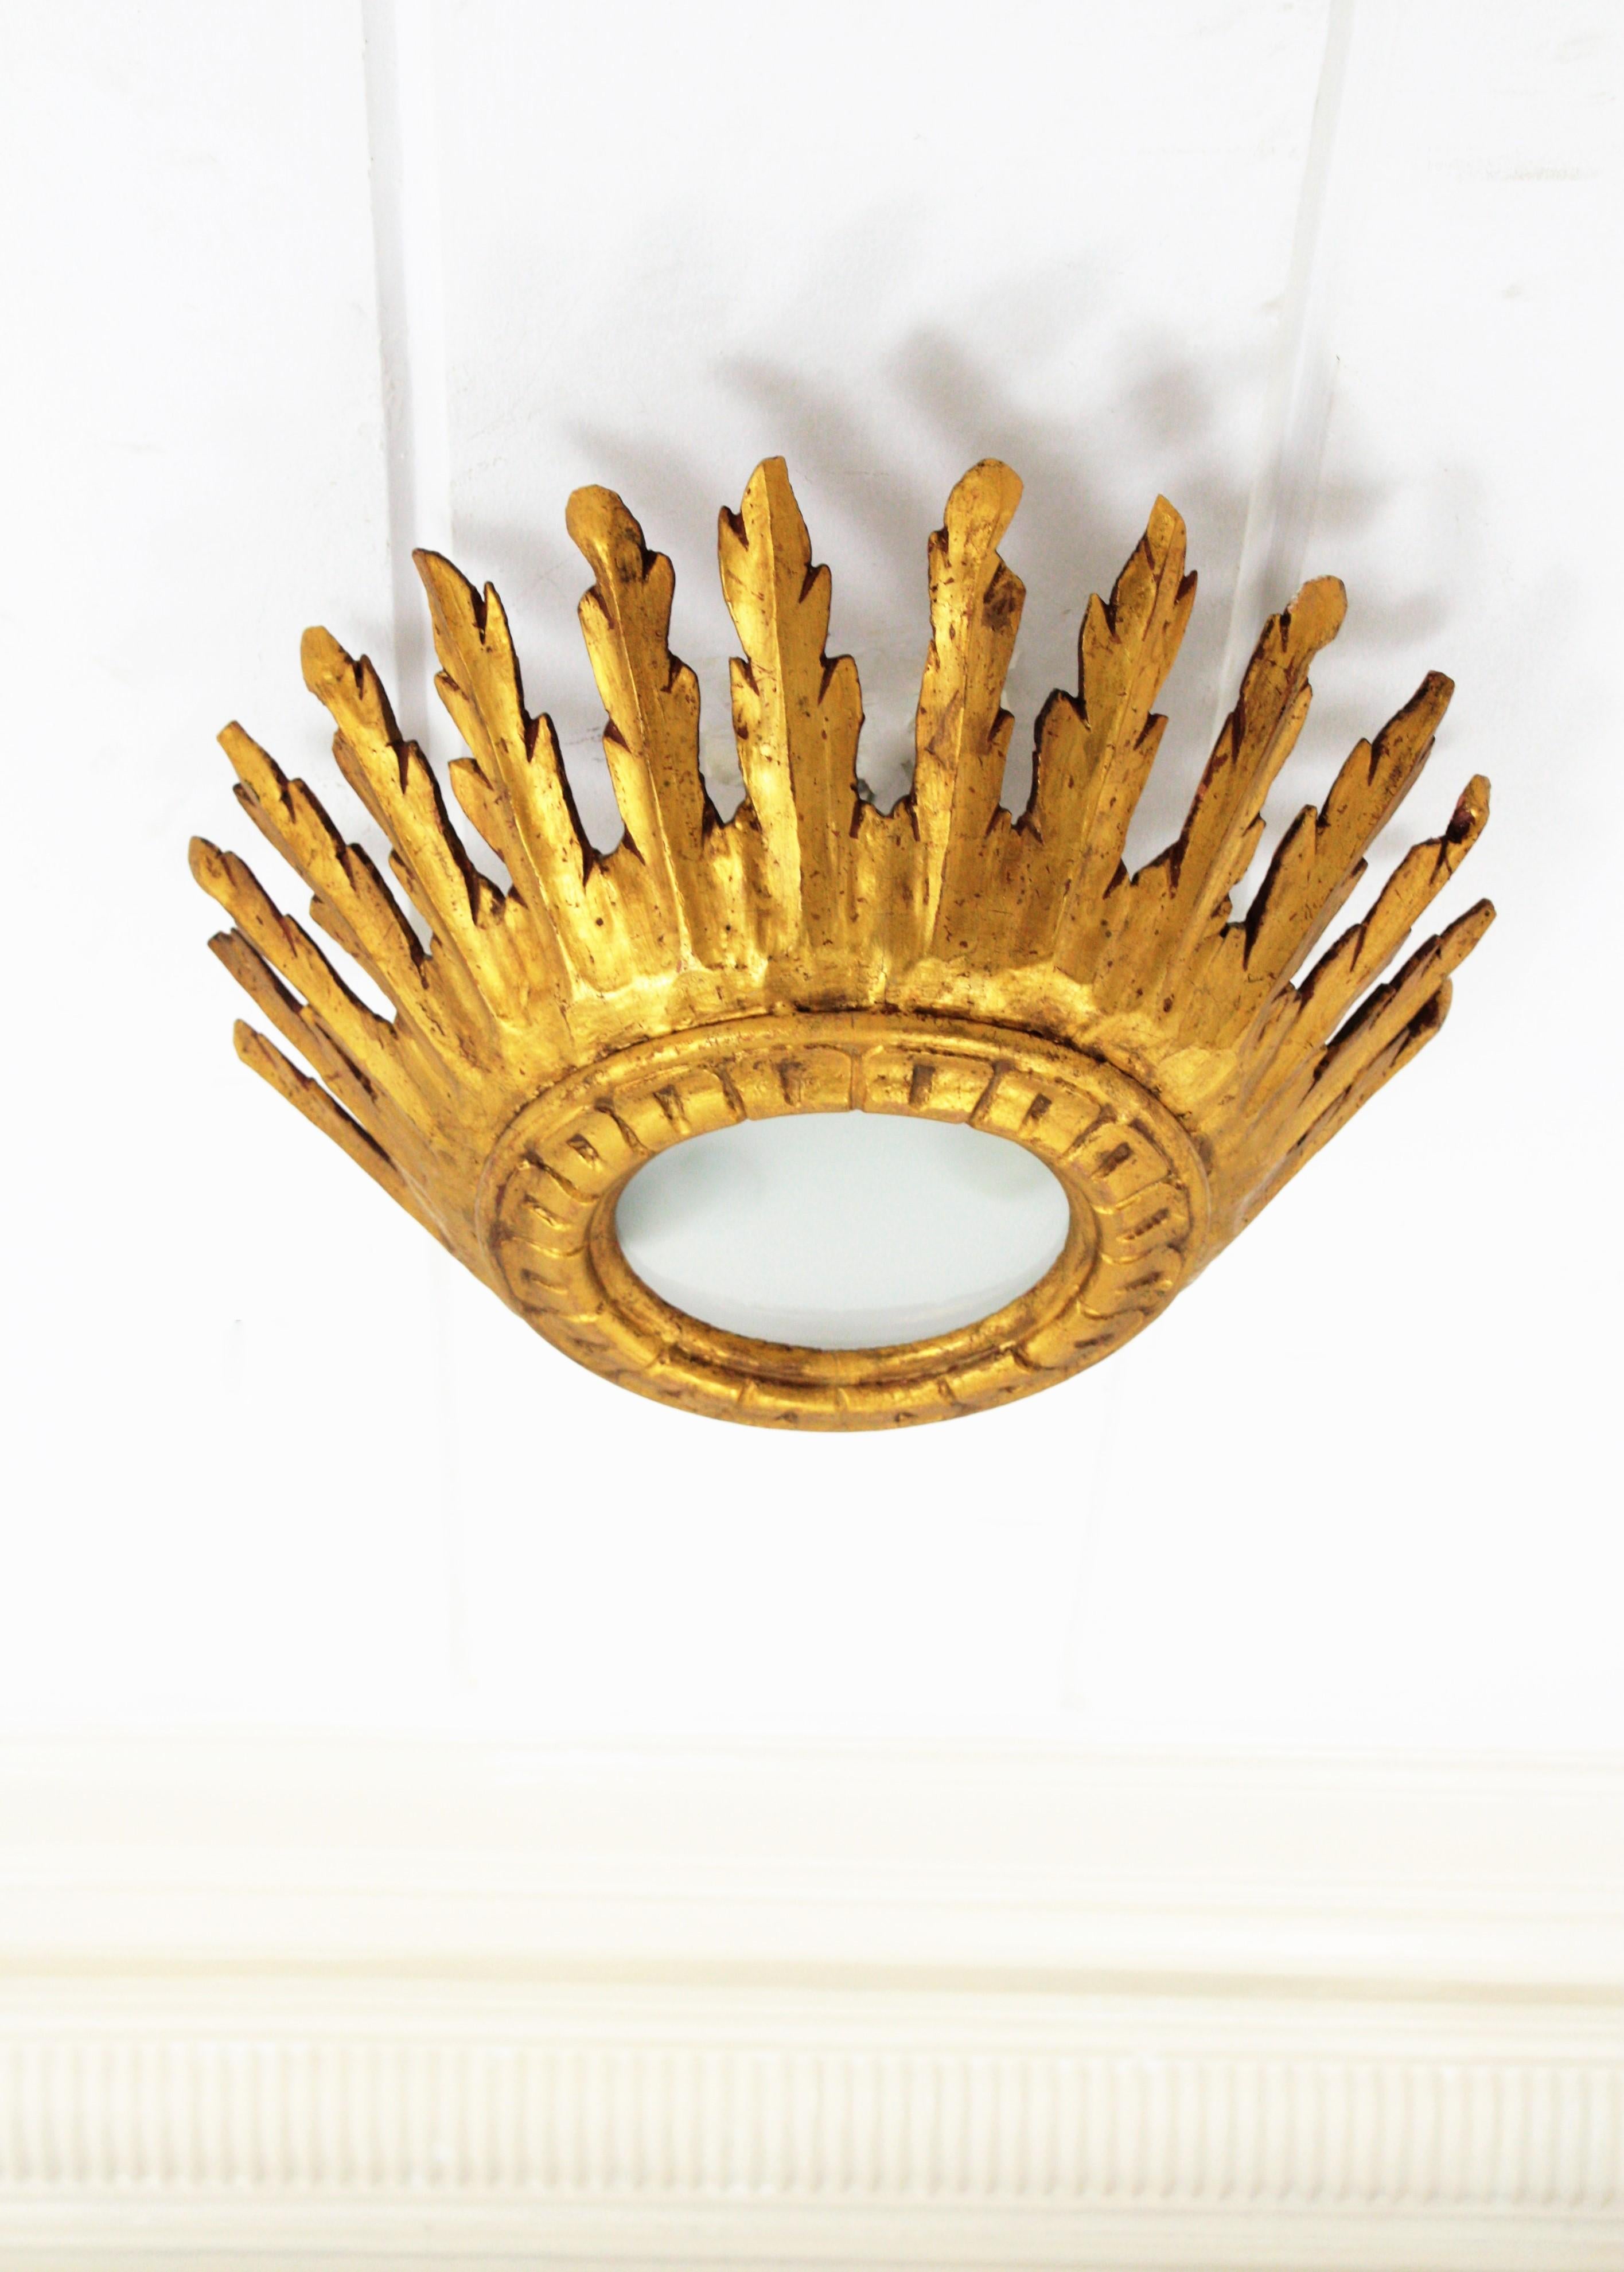 Spanish Baroque Giltwood Crown Sunburst Ceiling Light Fixture with Frosted Glass (Vergoldet)